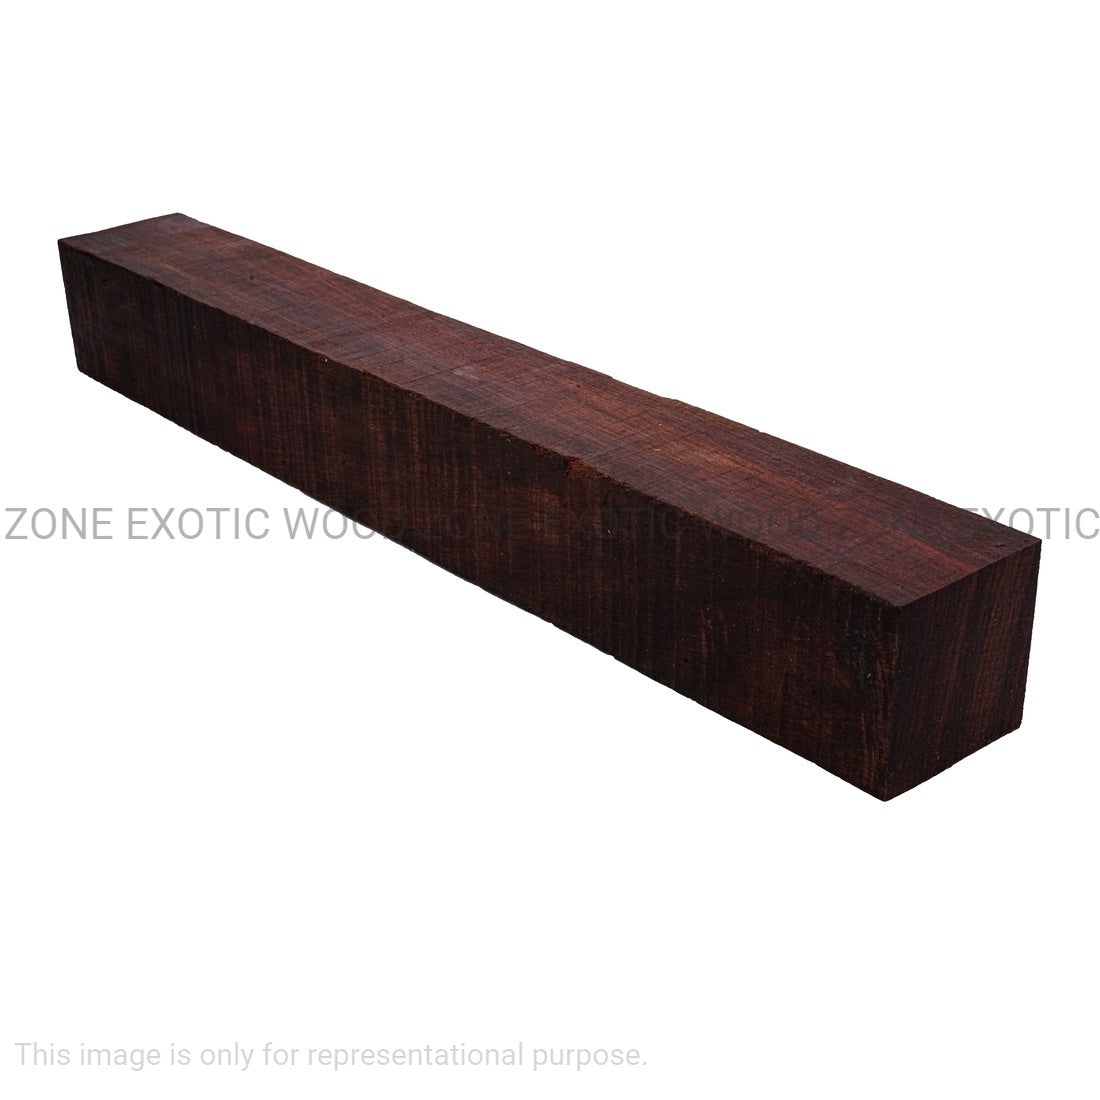 Pack of 2, Bloodwood Turning Wood Blanks 1-1/2 x 1-1/2 x 12 inches - Exotic Wood Zone - Buy online Across USA 